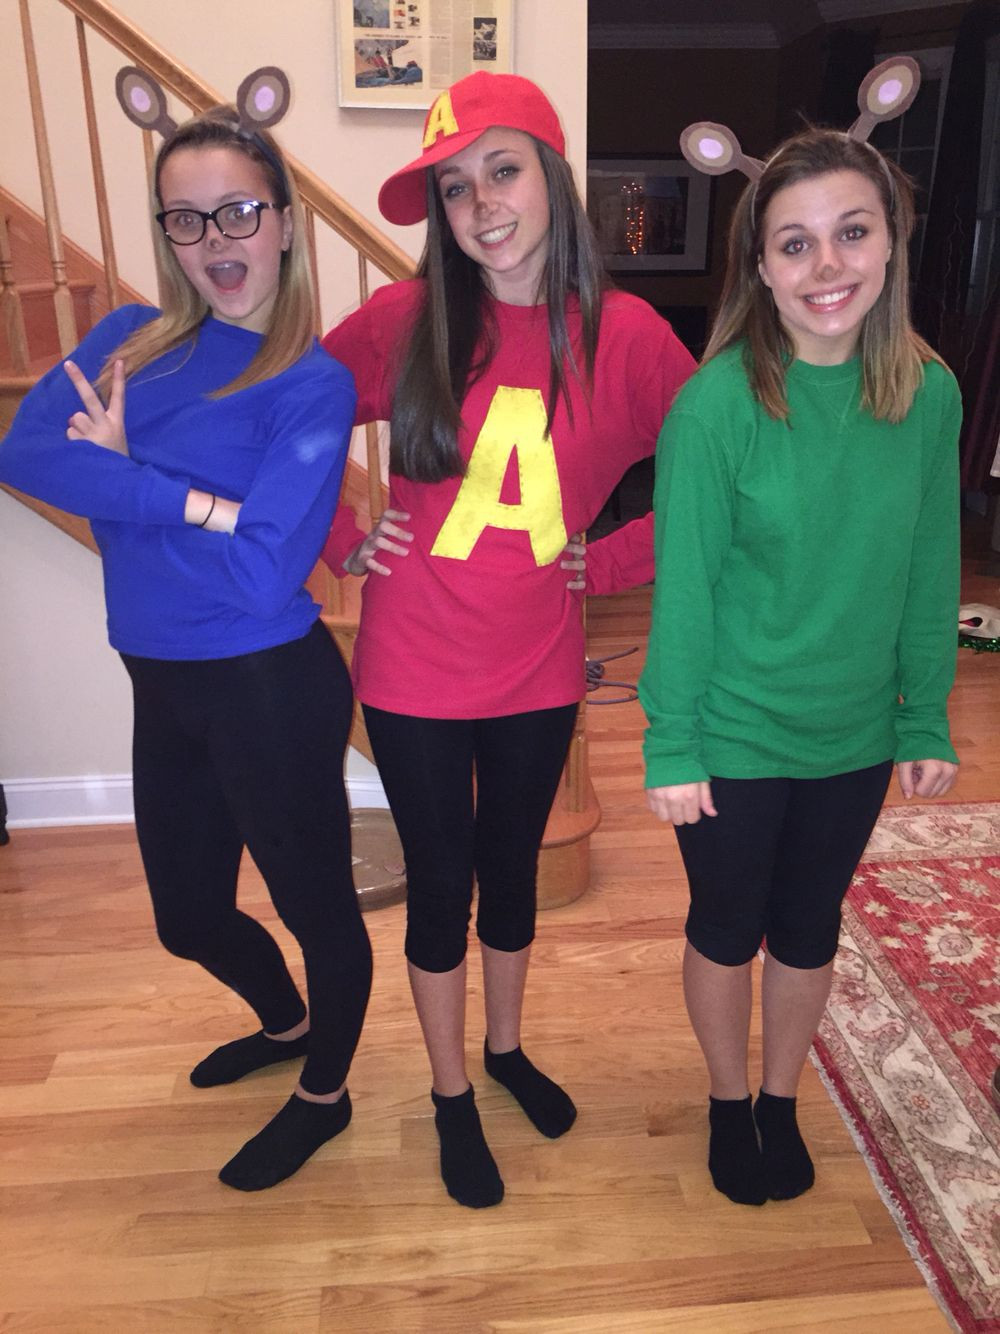 Alvin And The Chipmunks DIY Costume
 Alvin and the Chipmunks DIY Halloween costume